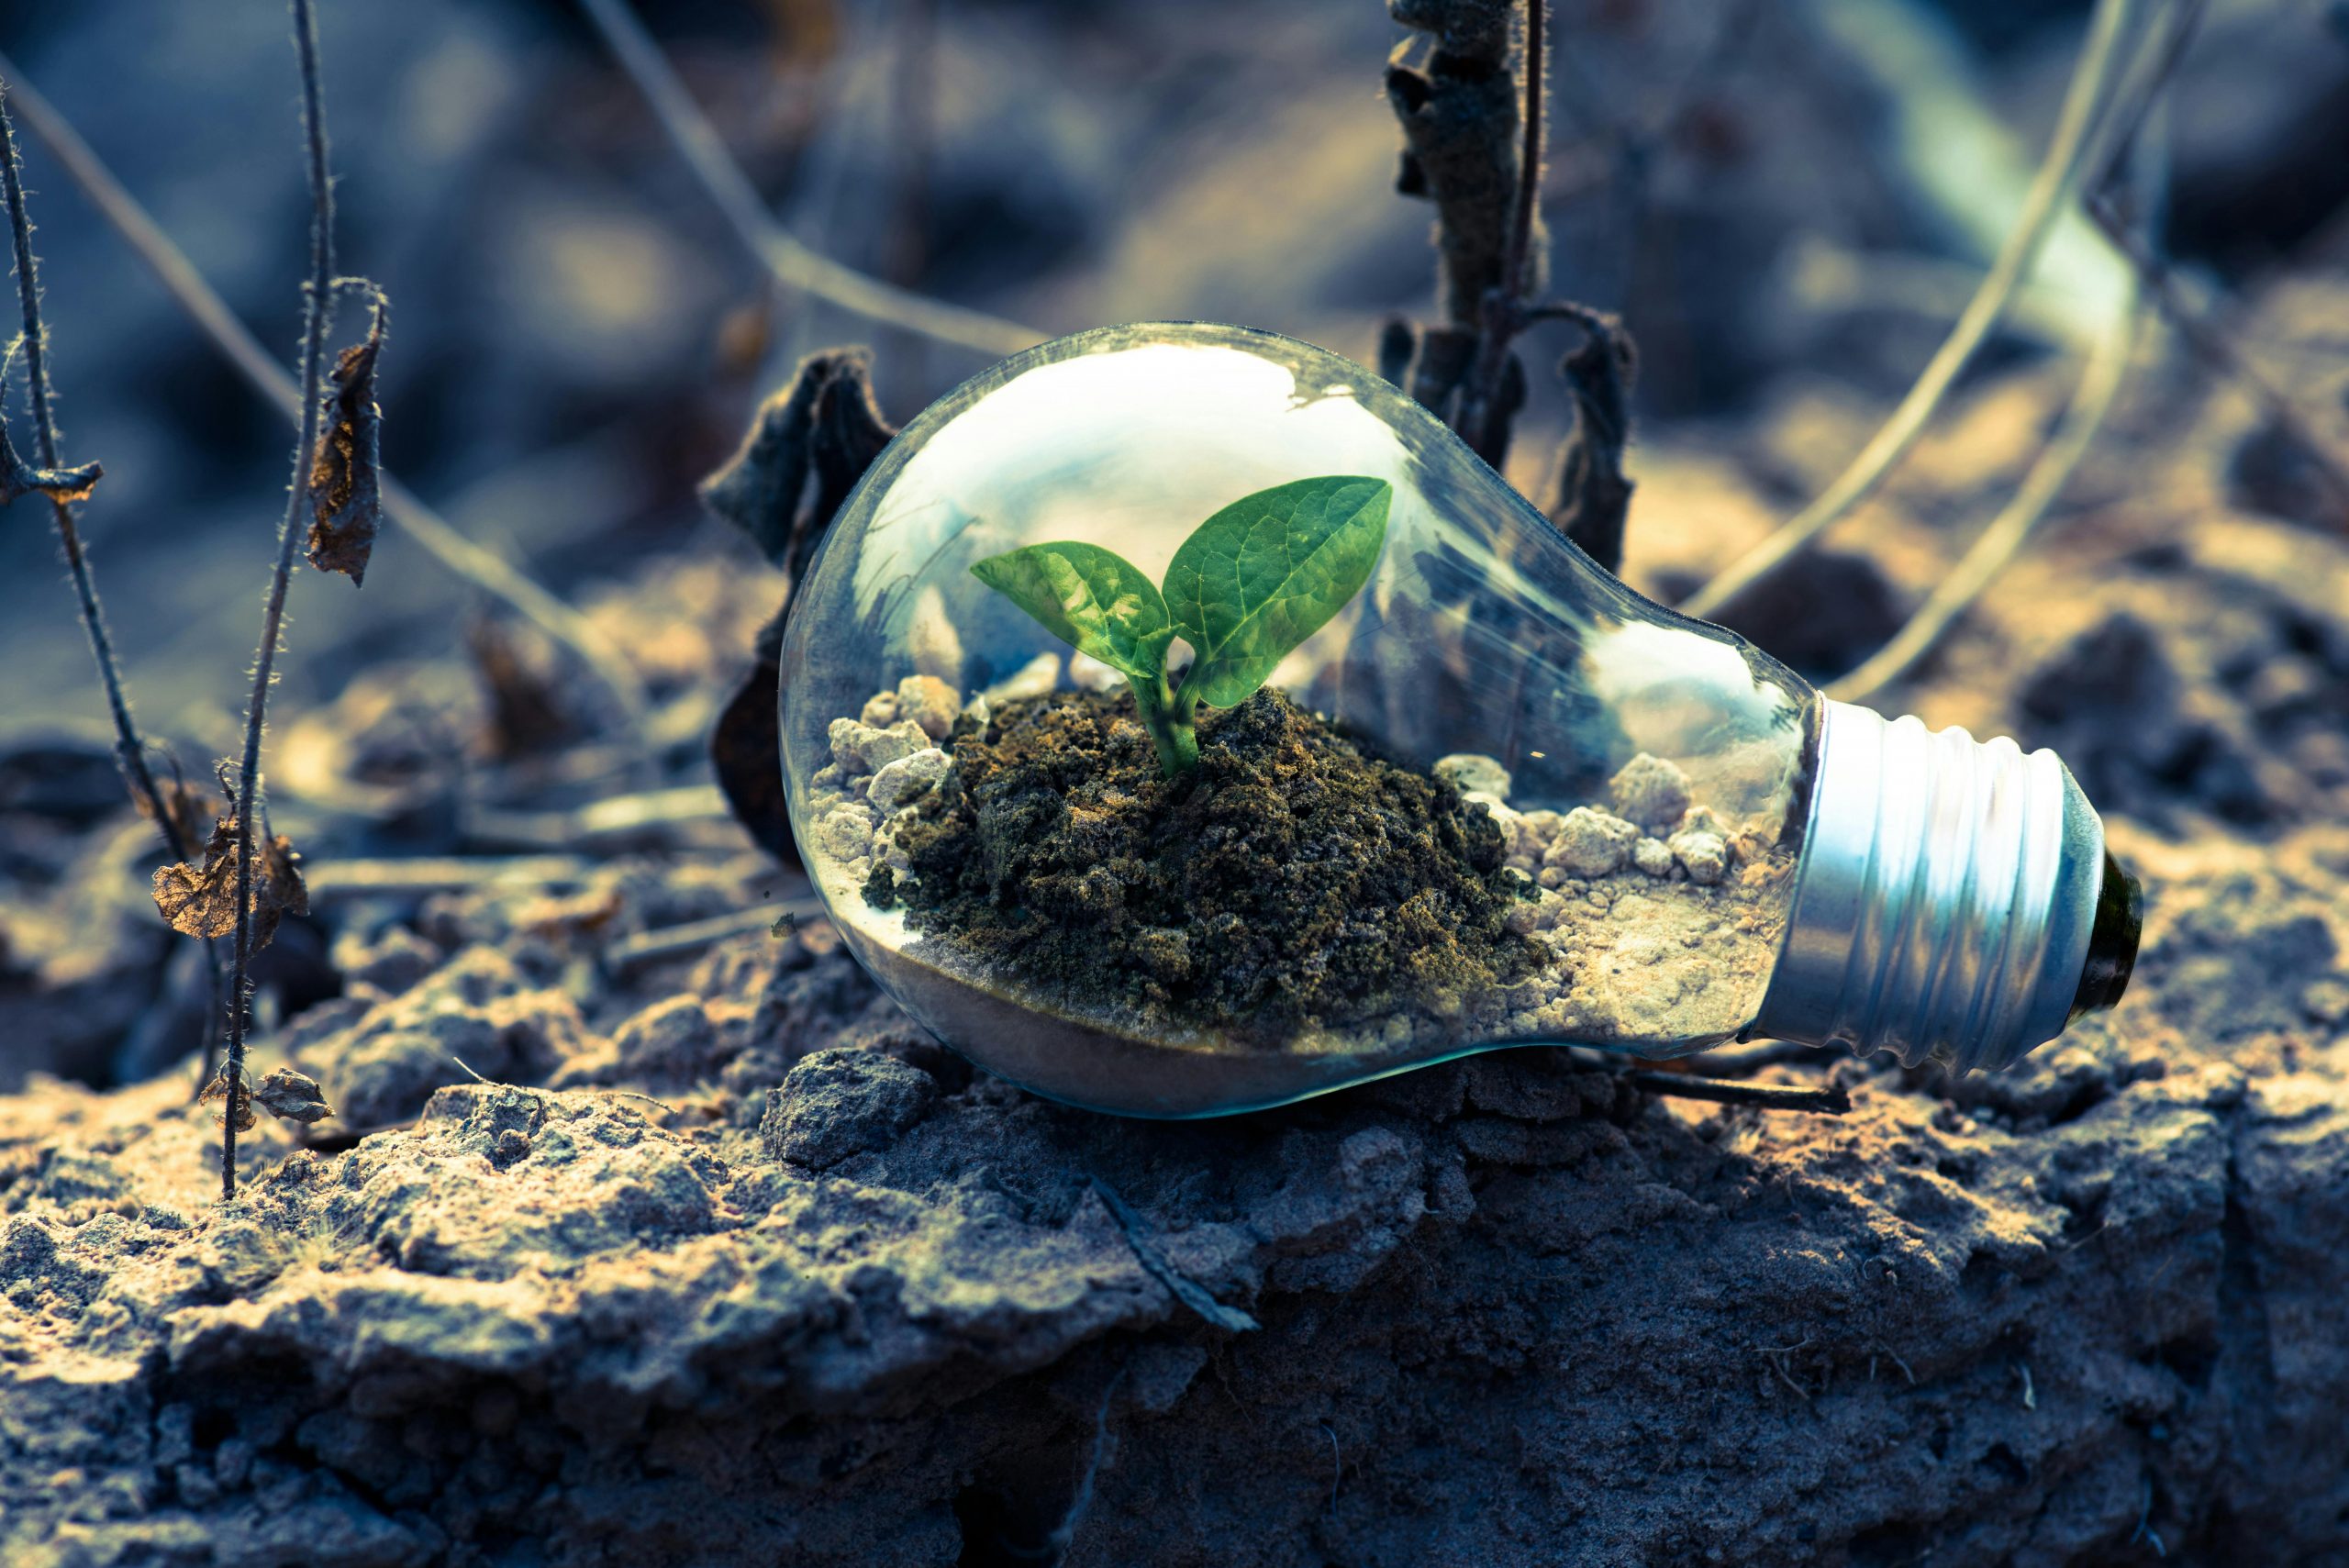 A lightbulb with a plant growing inside of it for the National Collaborative Working group in april